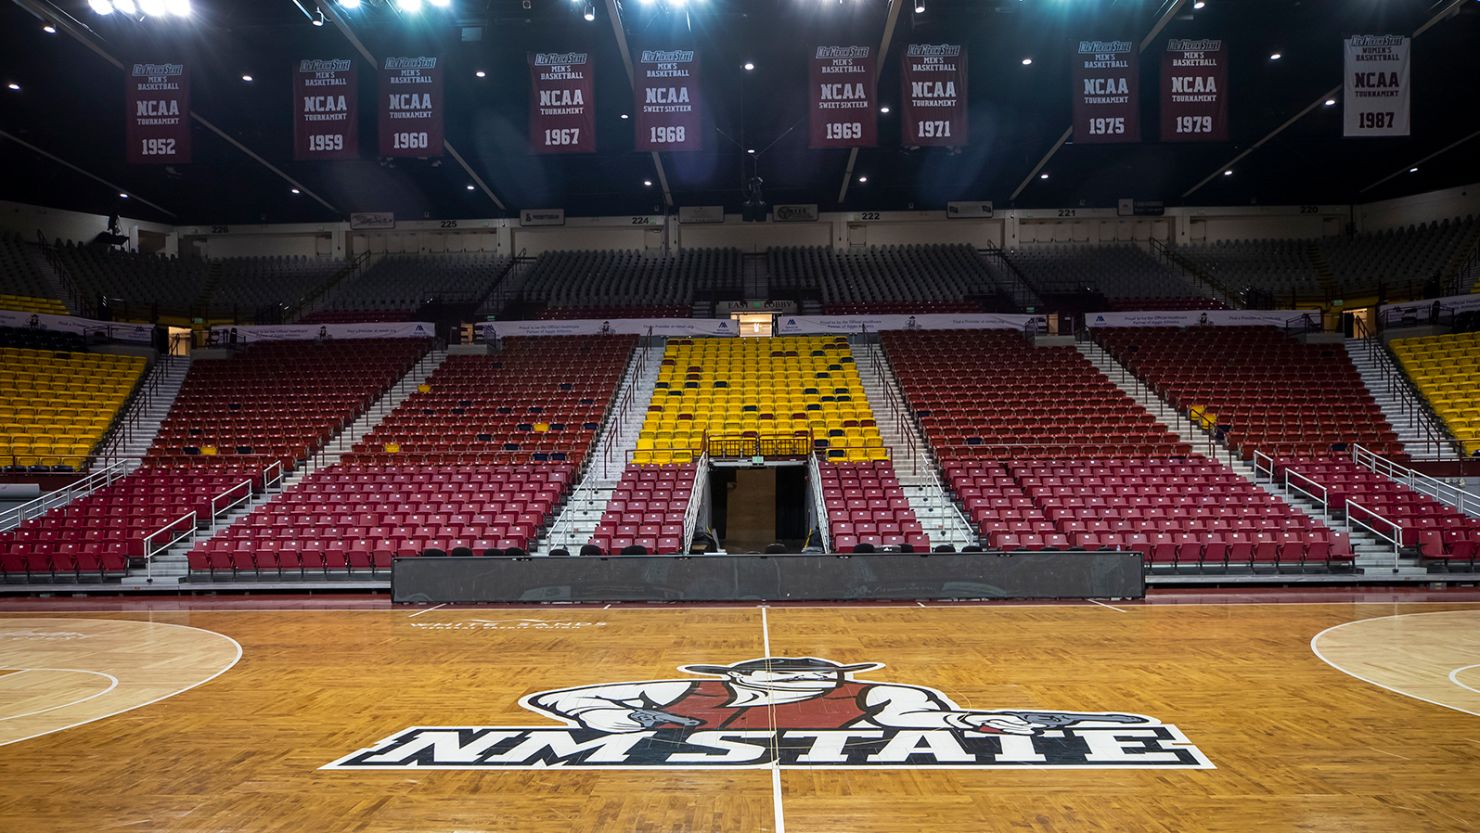 The basketball court of the Pan American Center at New Mexico State University is seen Wednesday, February 15, 2023, in Las Cruces, N.M.